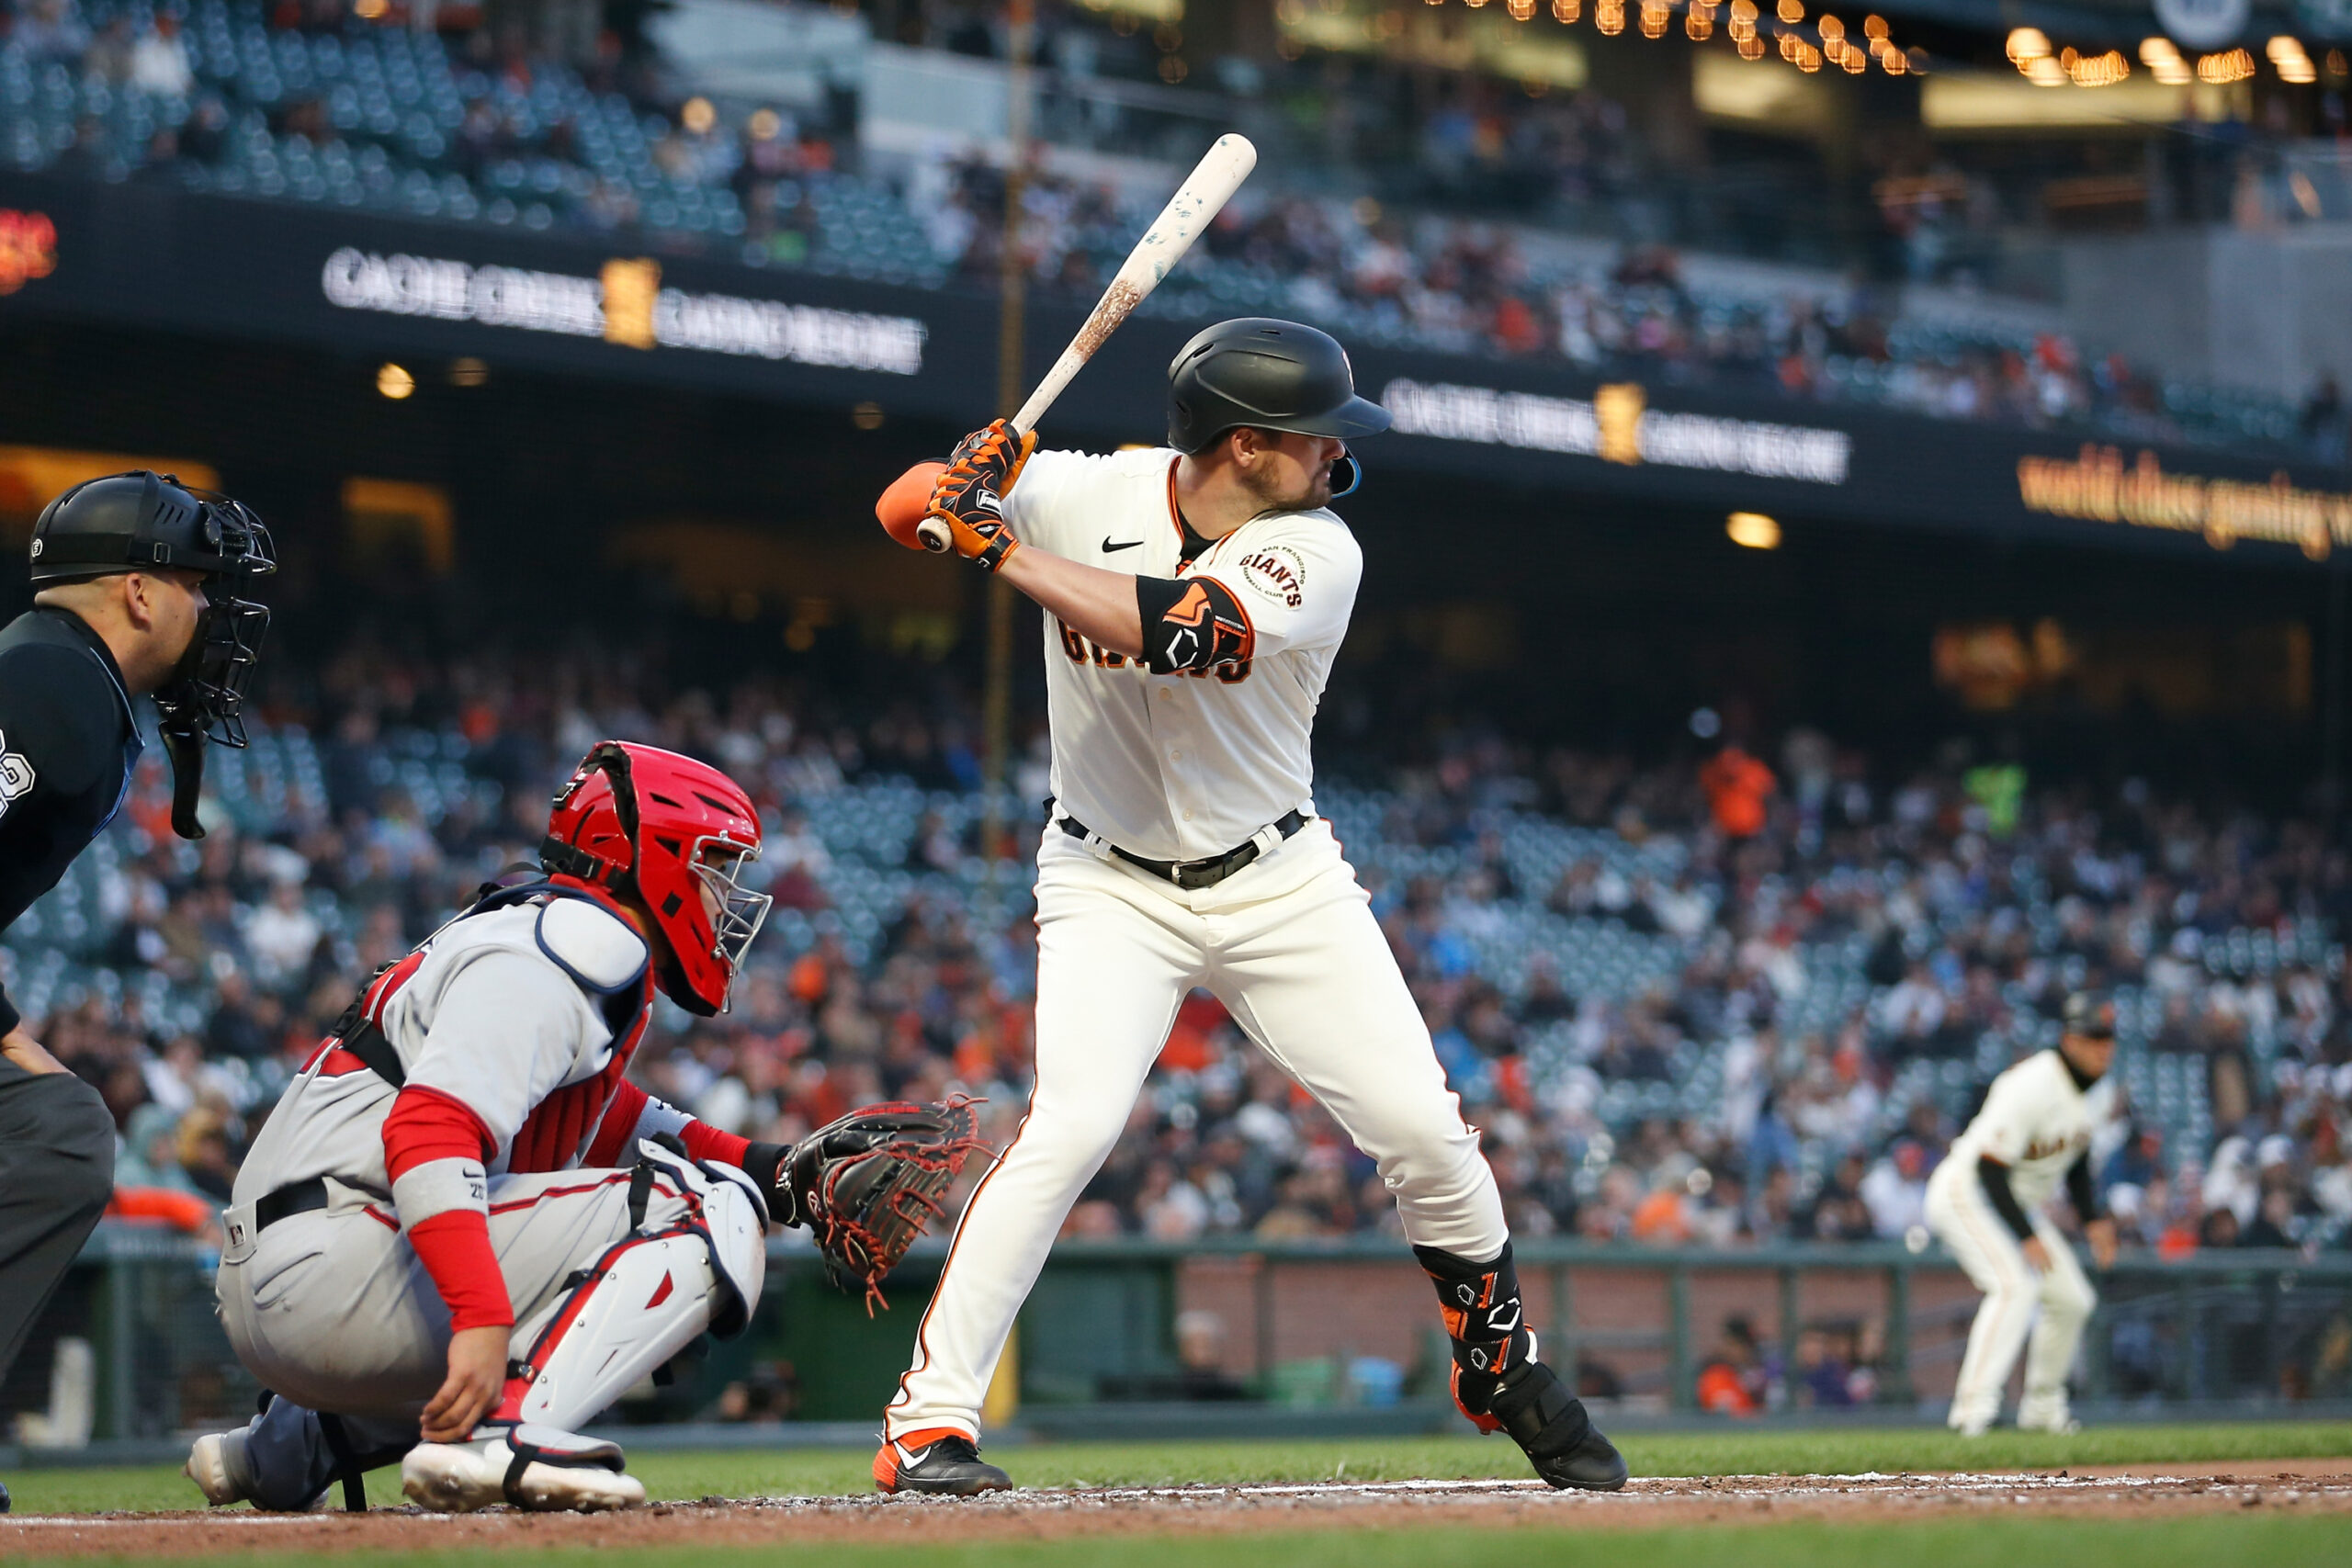 SF Giants Lose Fans Despite Cheaper Beer and New Rules